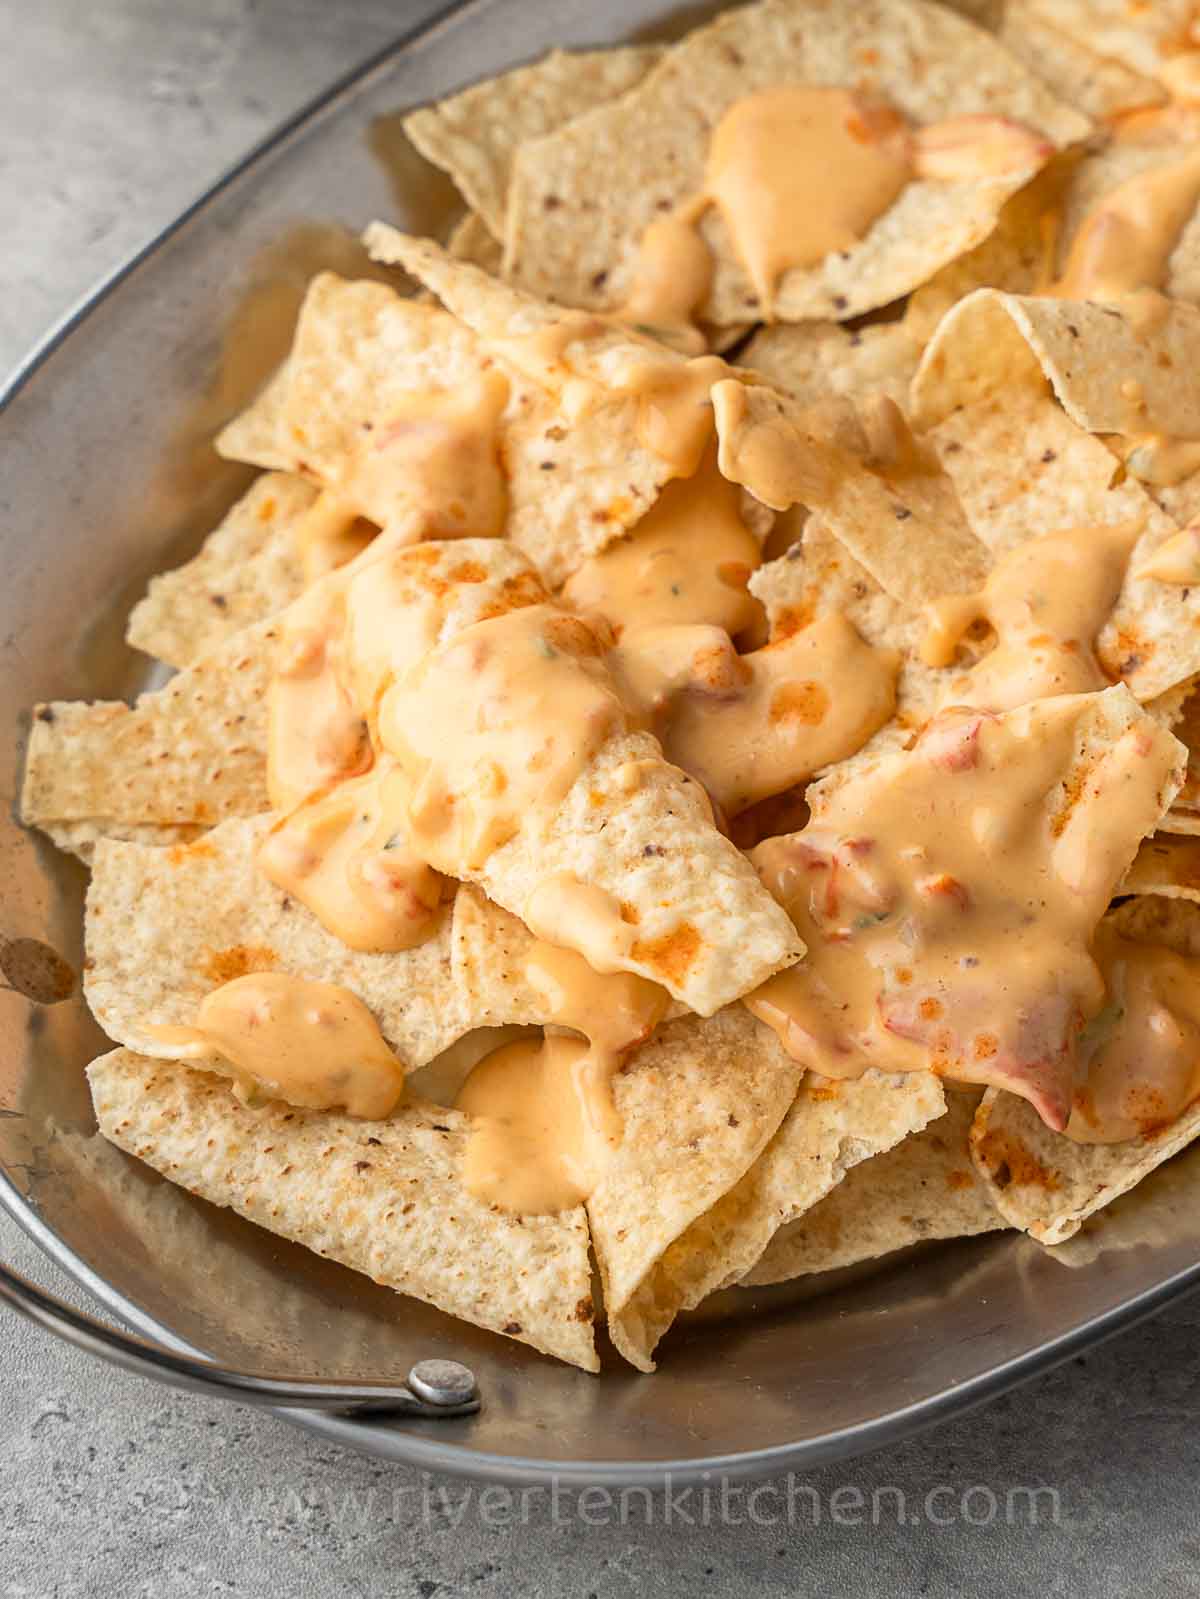 nacho cheese served on a plater. Made with Velveeta and Rotel.